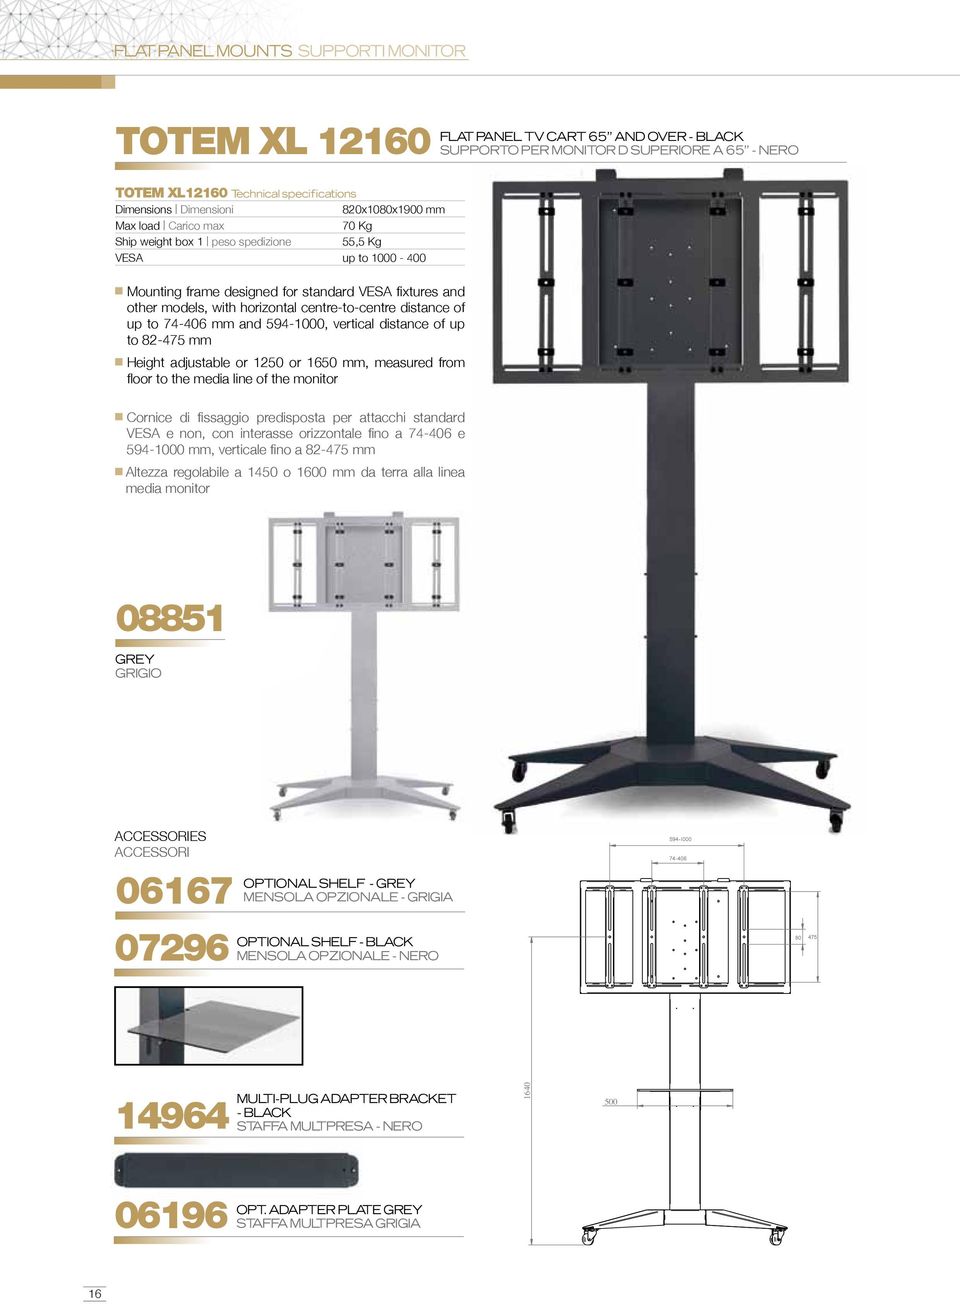 centre-to-centre distance of up to 74-406 mm and 594-1000, vertical distance of up to 82-475 mm Height adjustable or 1250 or 1650 mm, measured from floor to the media line of the monitor Cornice di